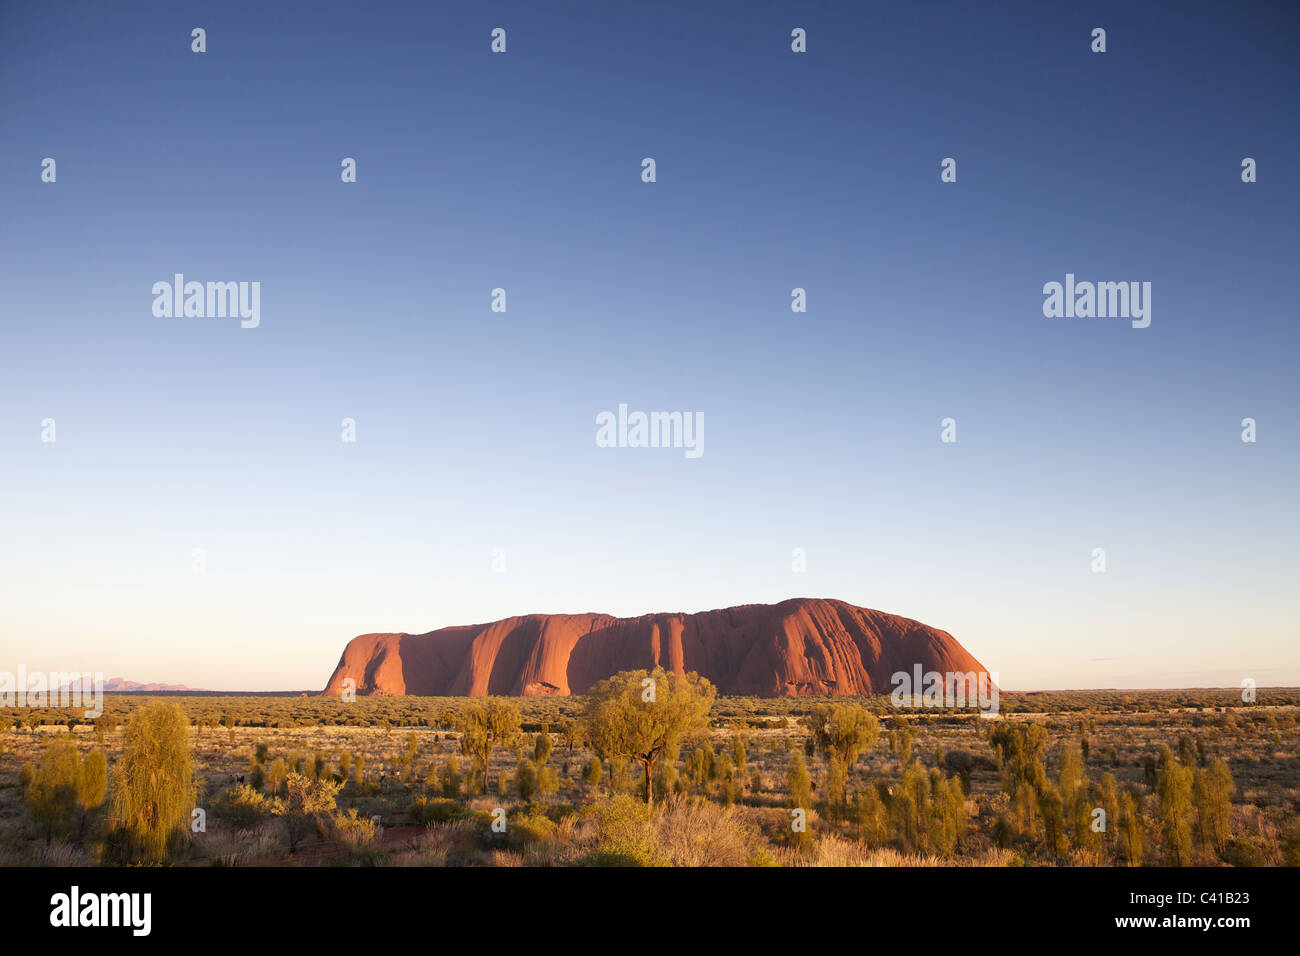 Ayres Rock - Uluru - Red Rock at the heart of the outback Stock Photo